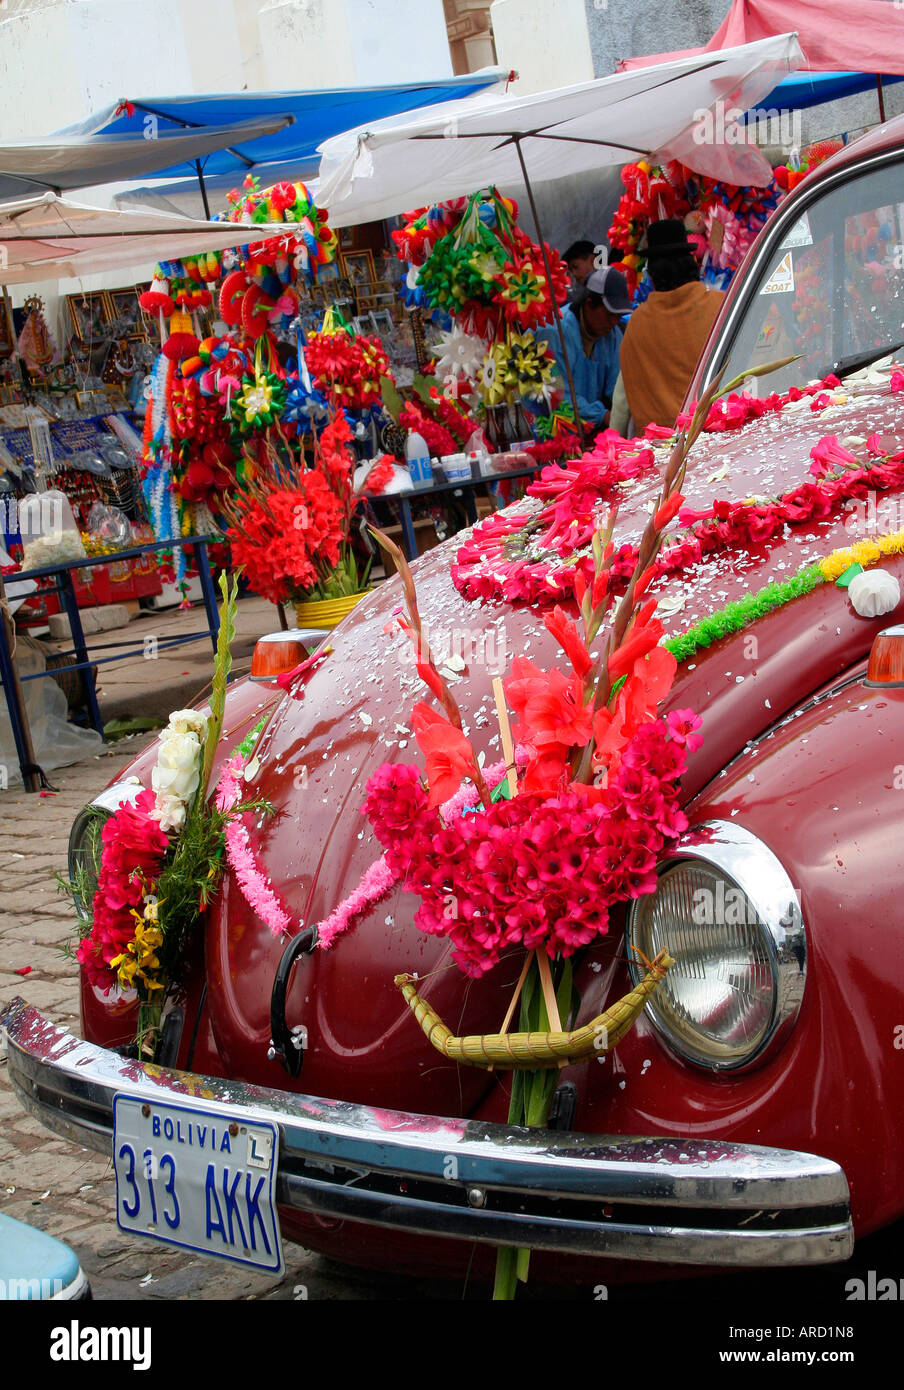 Beetle car adorned with flowers and garlands for the traditional car blessing service in Copacabana, Bolivia, South America. Stock Photo